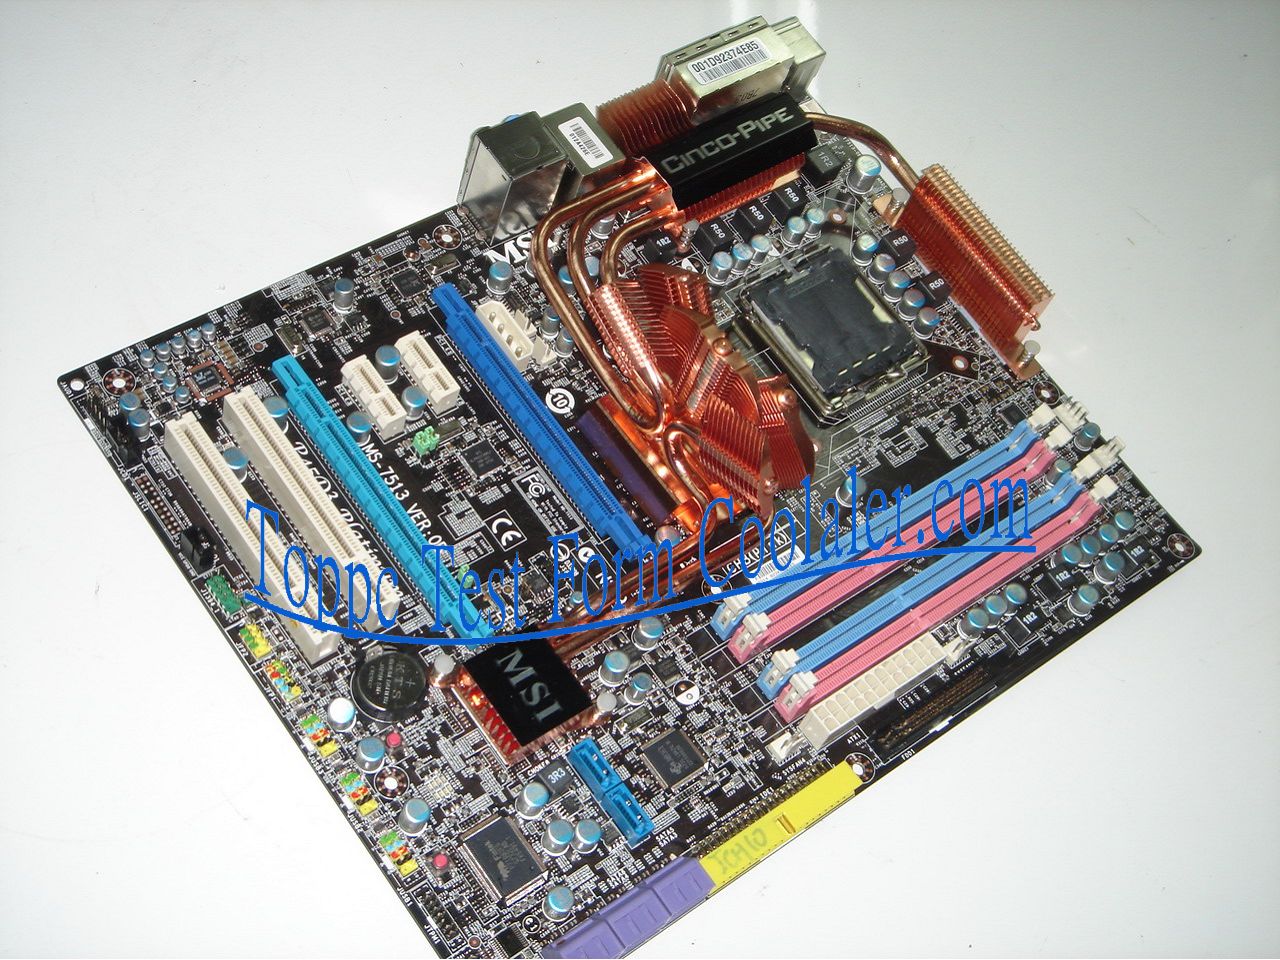 Media asset in full size related to 3dfxzone.it news item entitled as follows: Un cooler con 5 heatpipe per la mobo P45D3 Platinum di MSI | Image Name: news7088_1.jpg